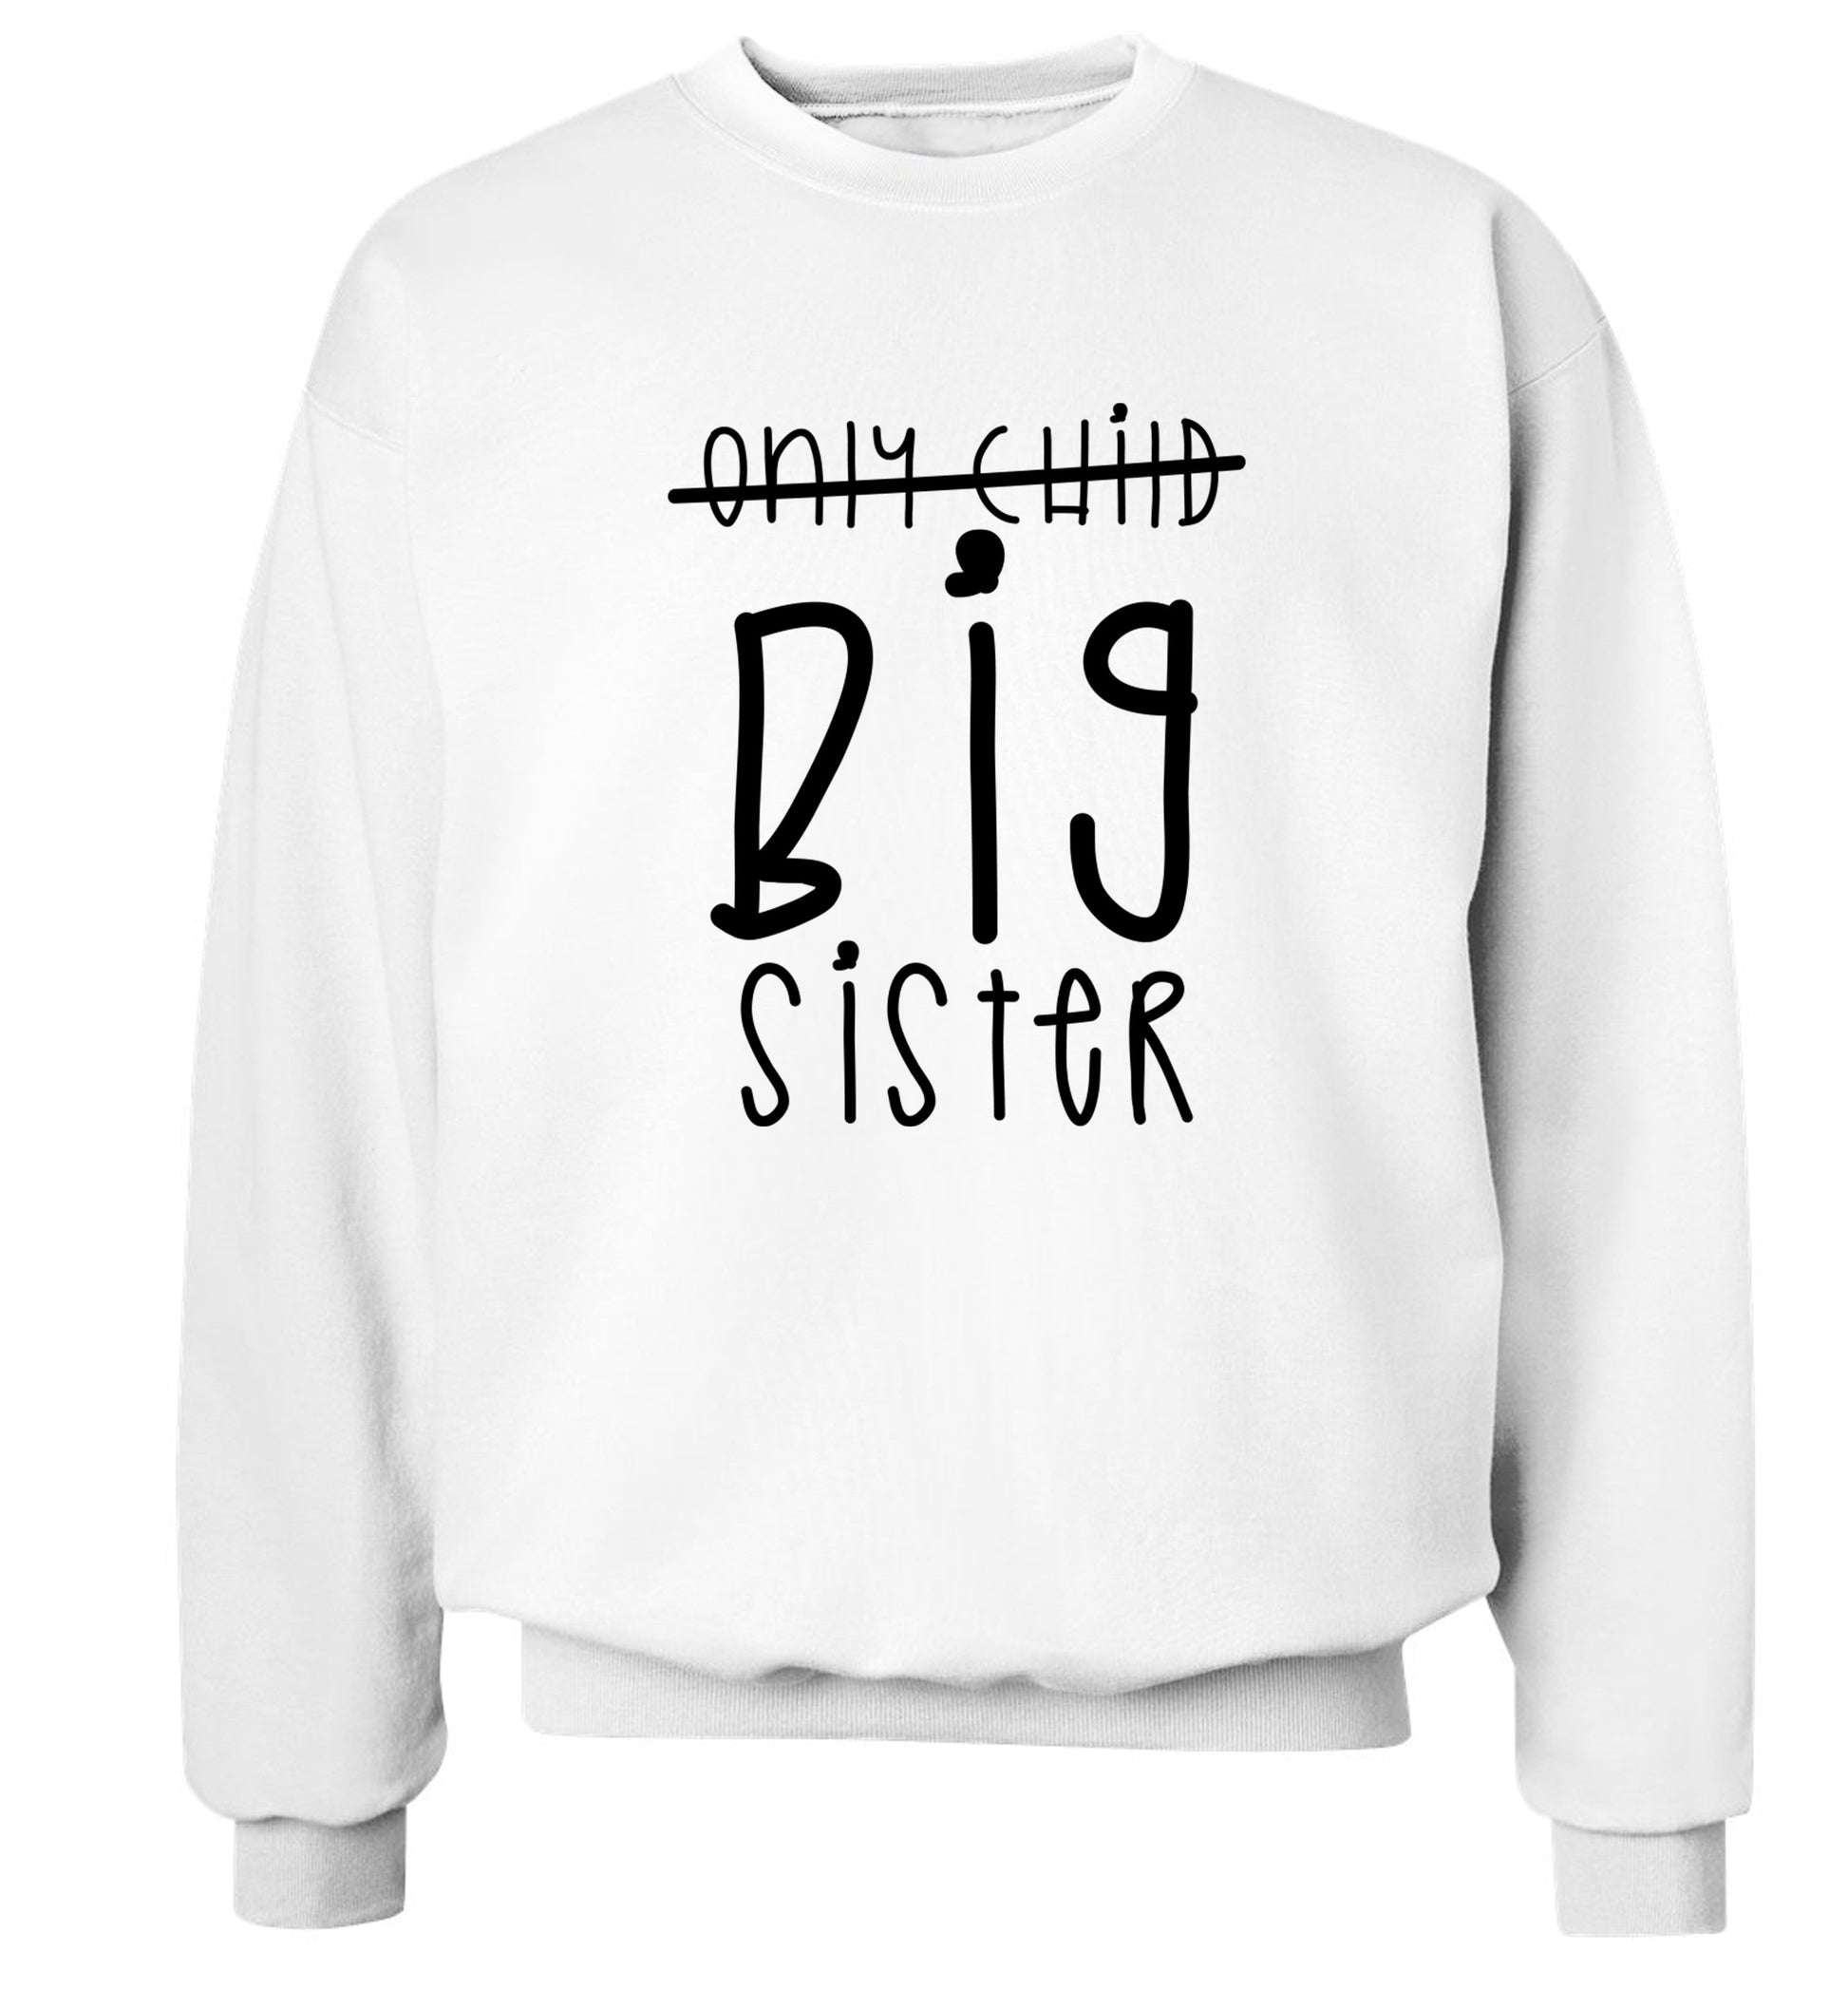 Only child big sister Adult's unisex white Sweater 2XL